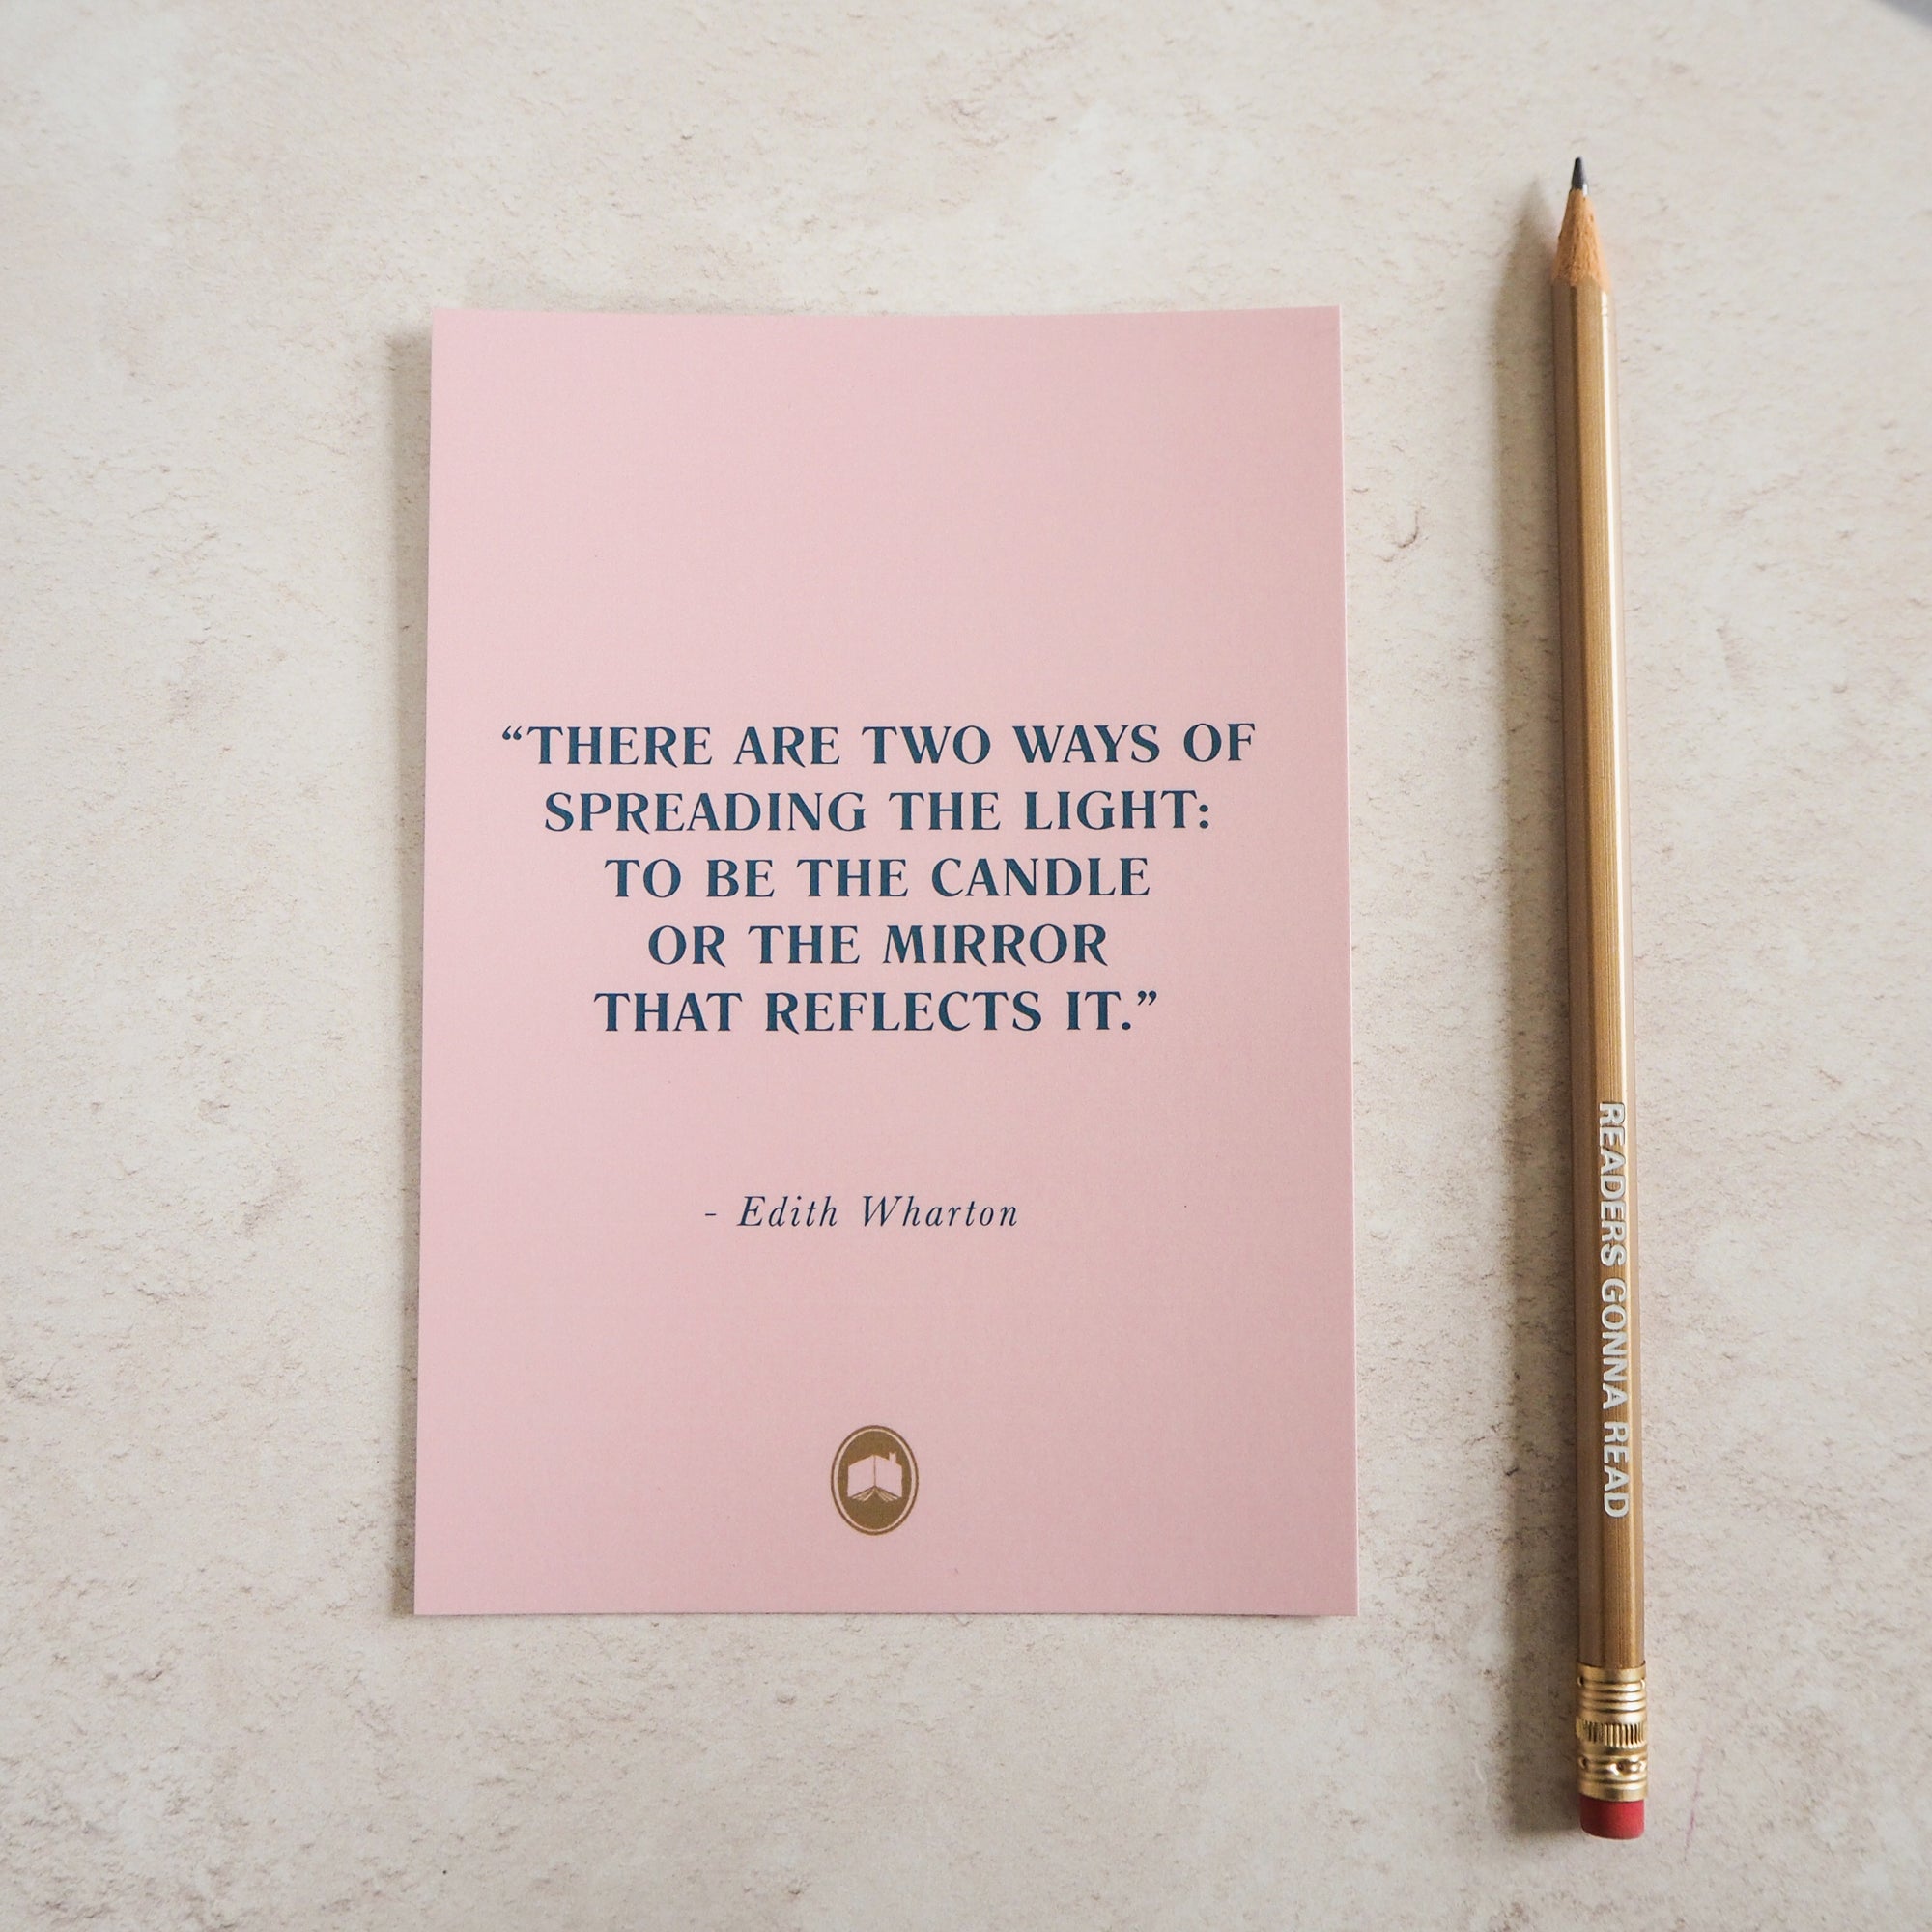 Reading Journal - Stationery for Book Lovers - Literary Emporium Ltd